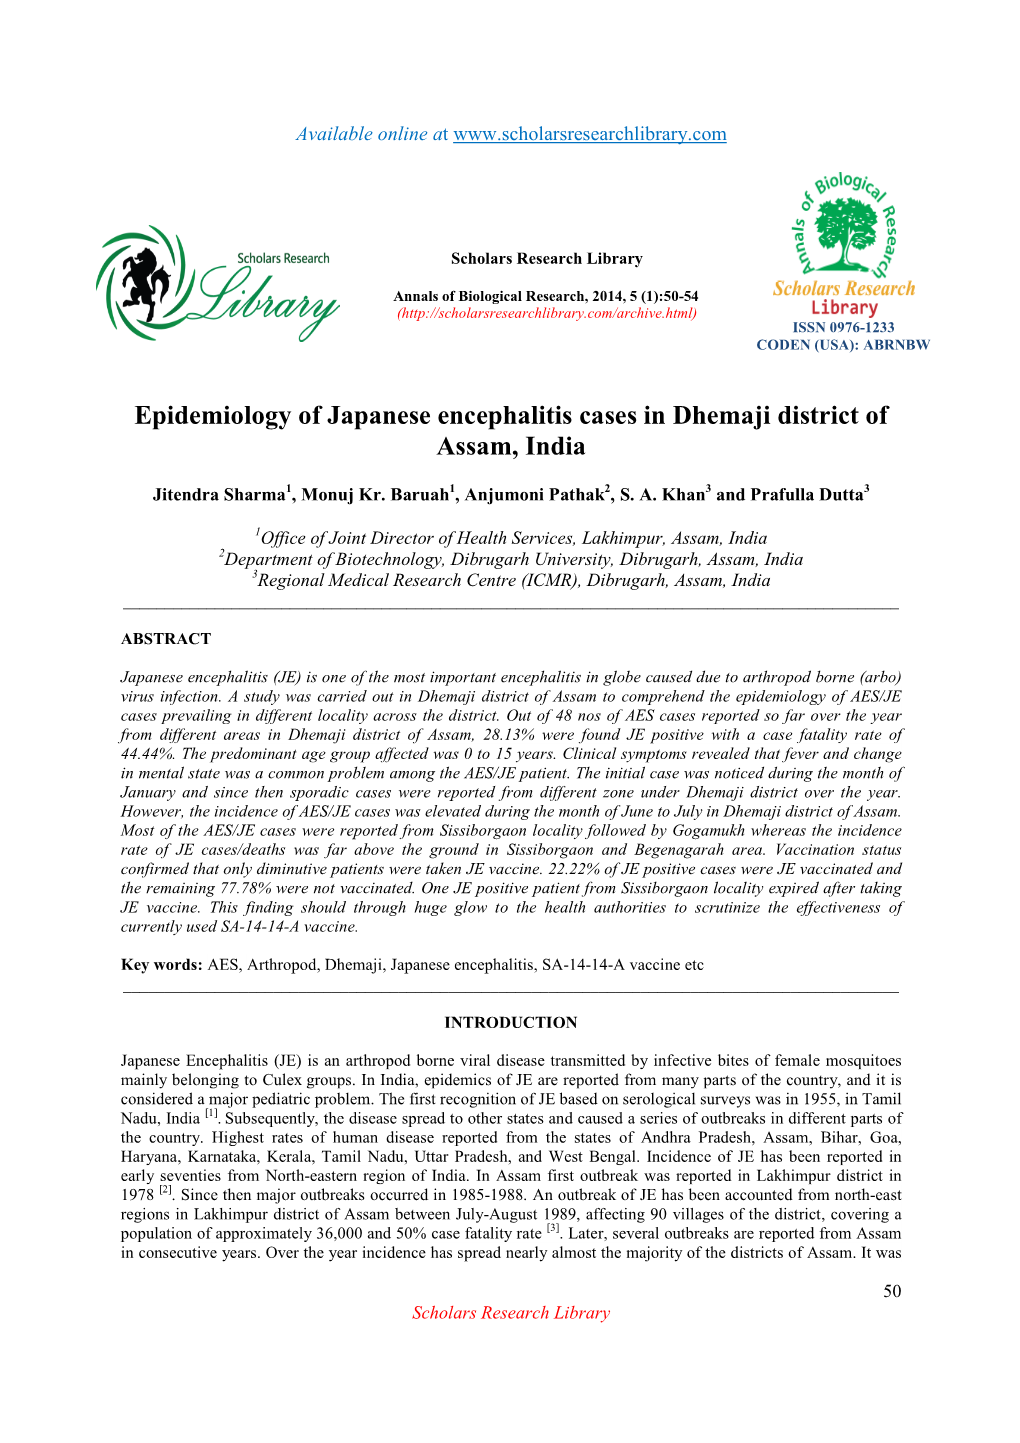 Epidemiology of Japanese Encephalitis Cases in Dhemaji District of Assam, India